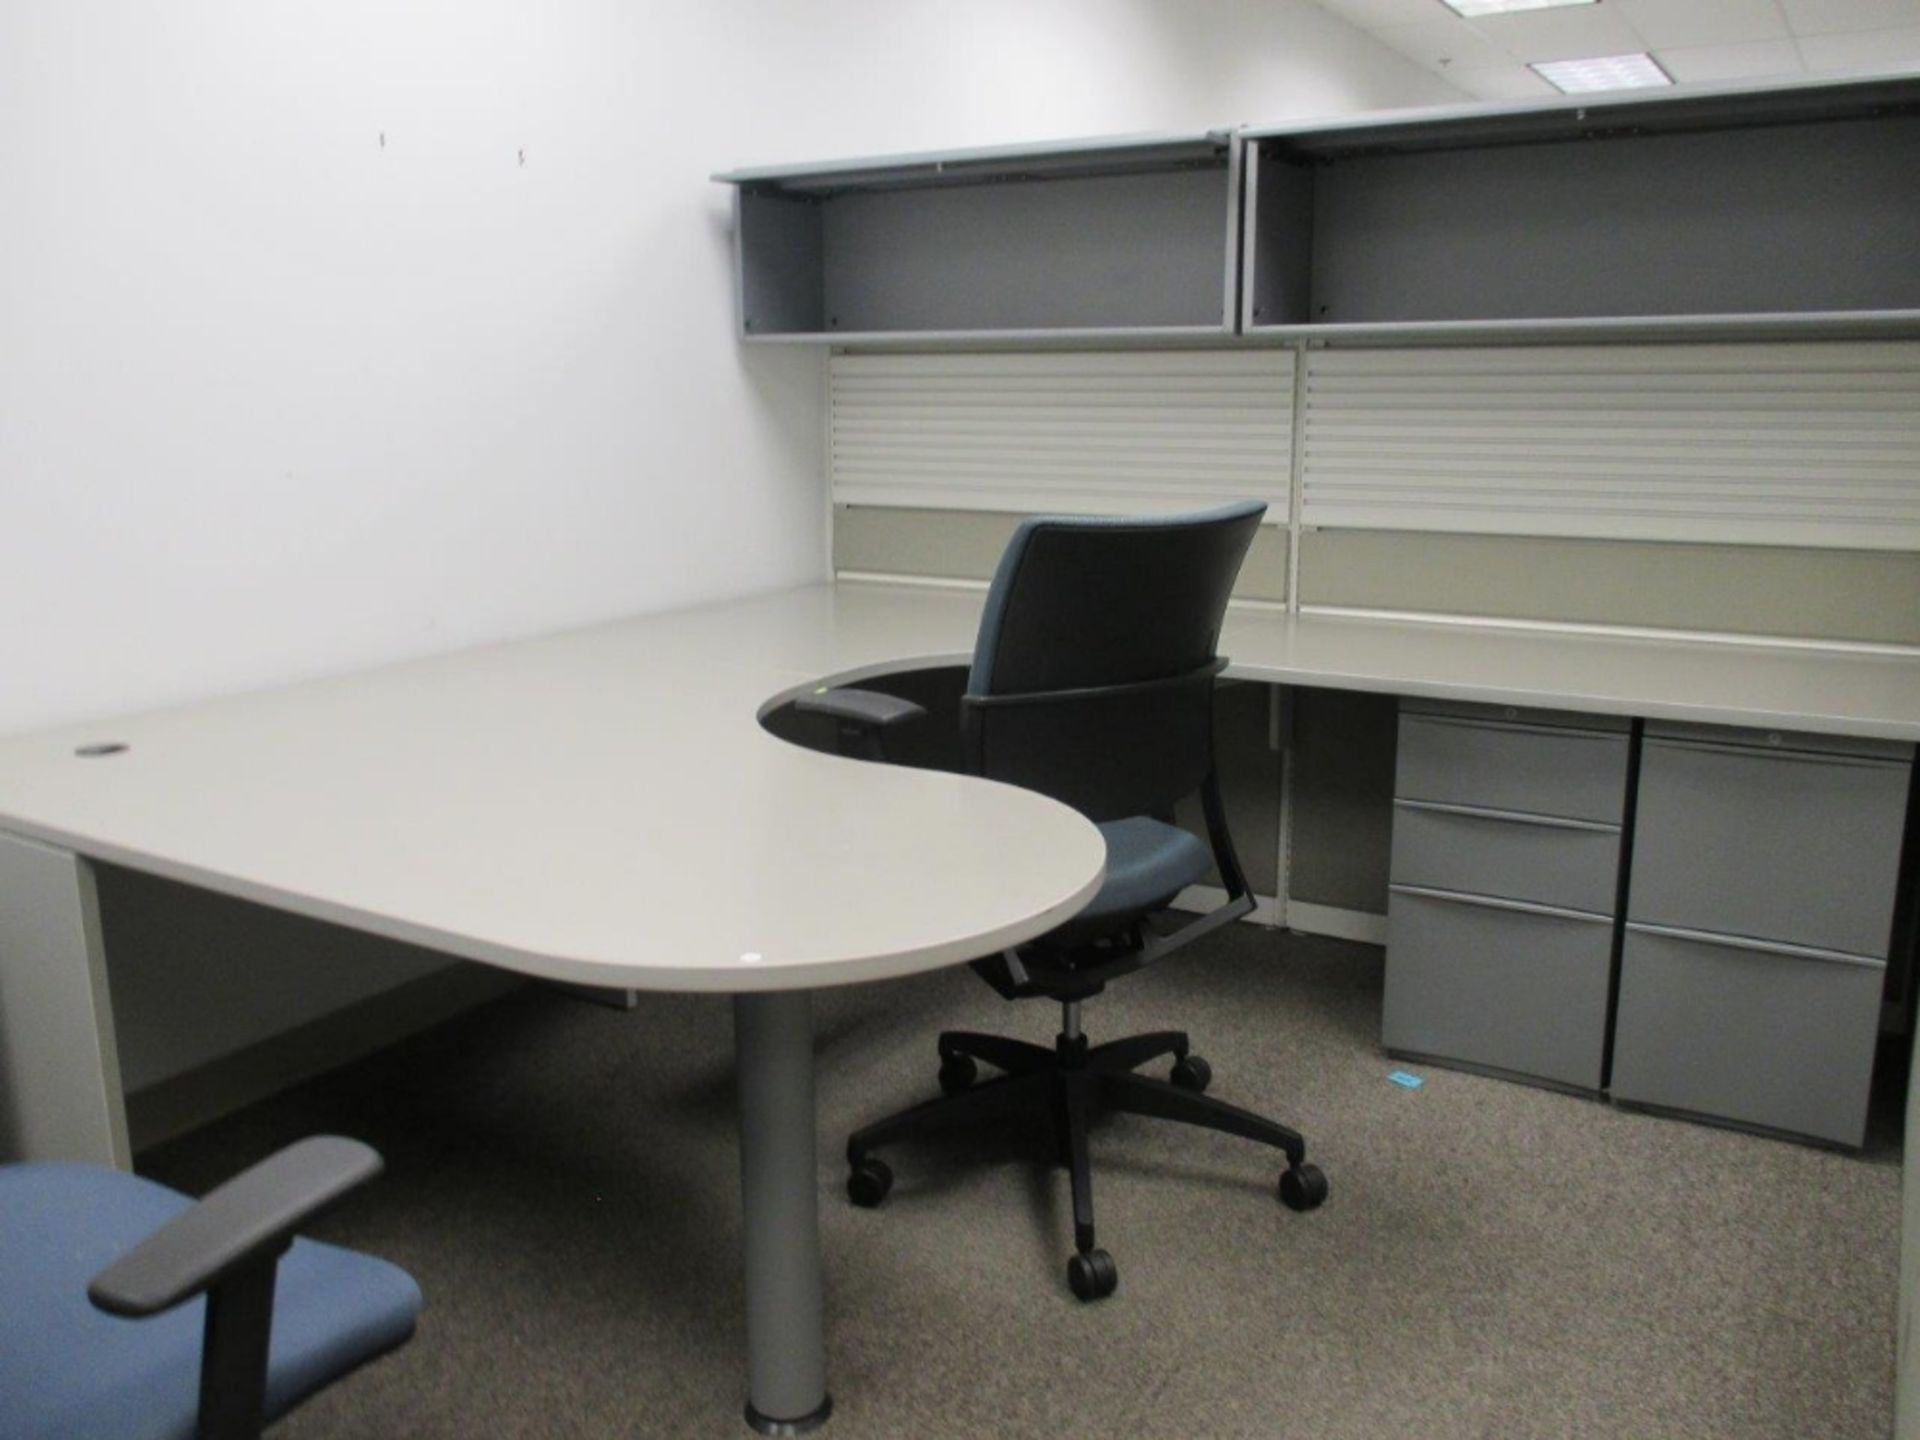 2008 Tecknion T Shaped 2 Station Cubicle w/ 1 Freestanding divider - Image 3 of 3